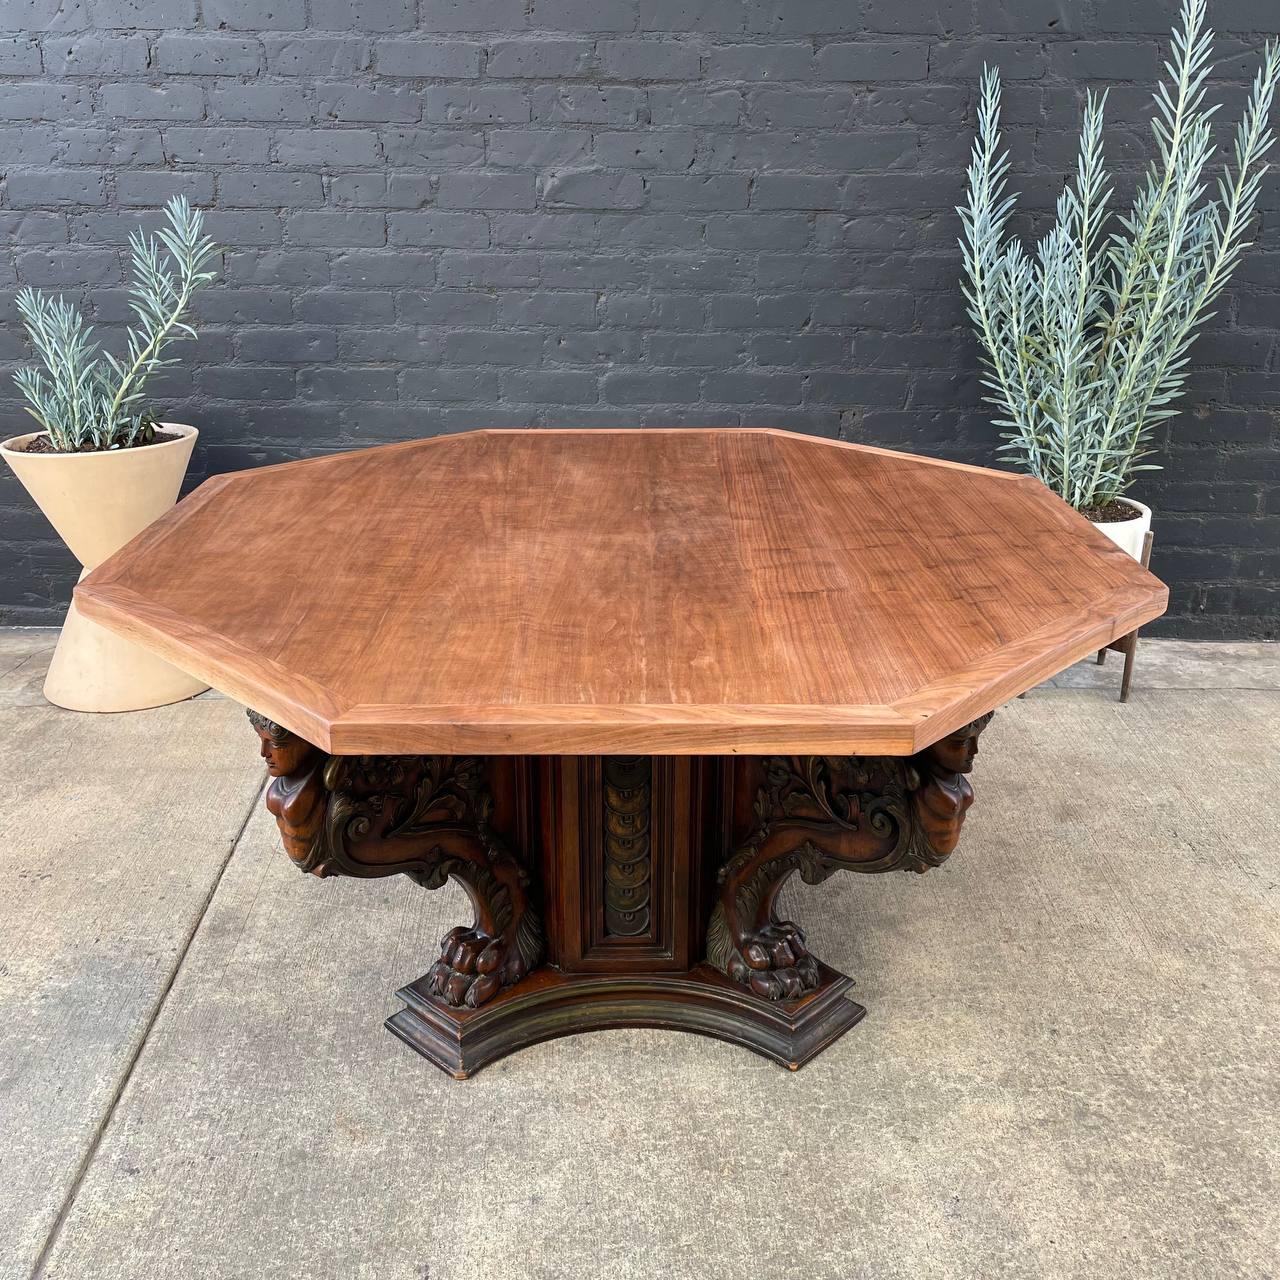 Antique Italian Renaissance style carved walnut dining table.